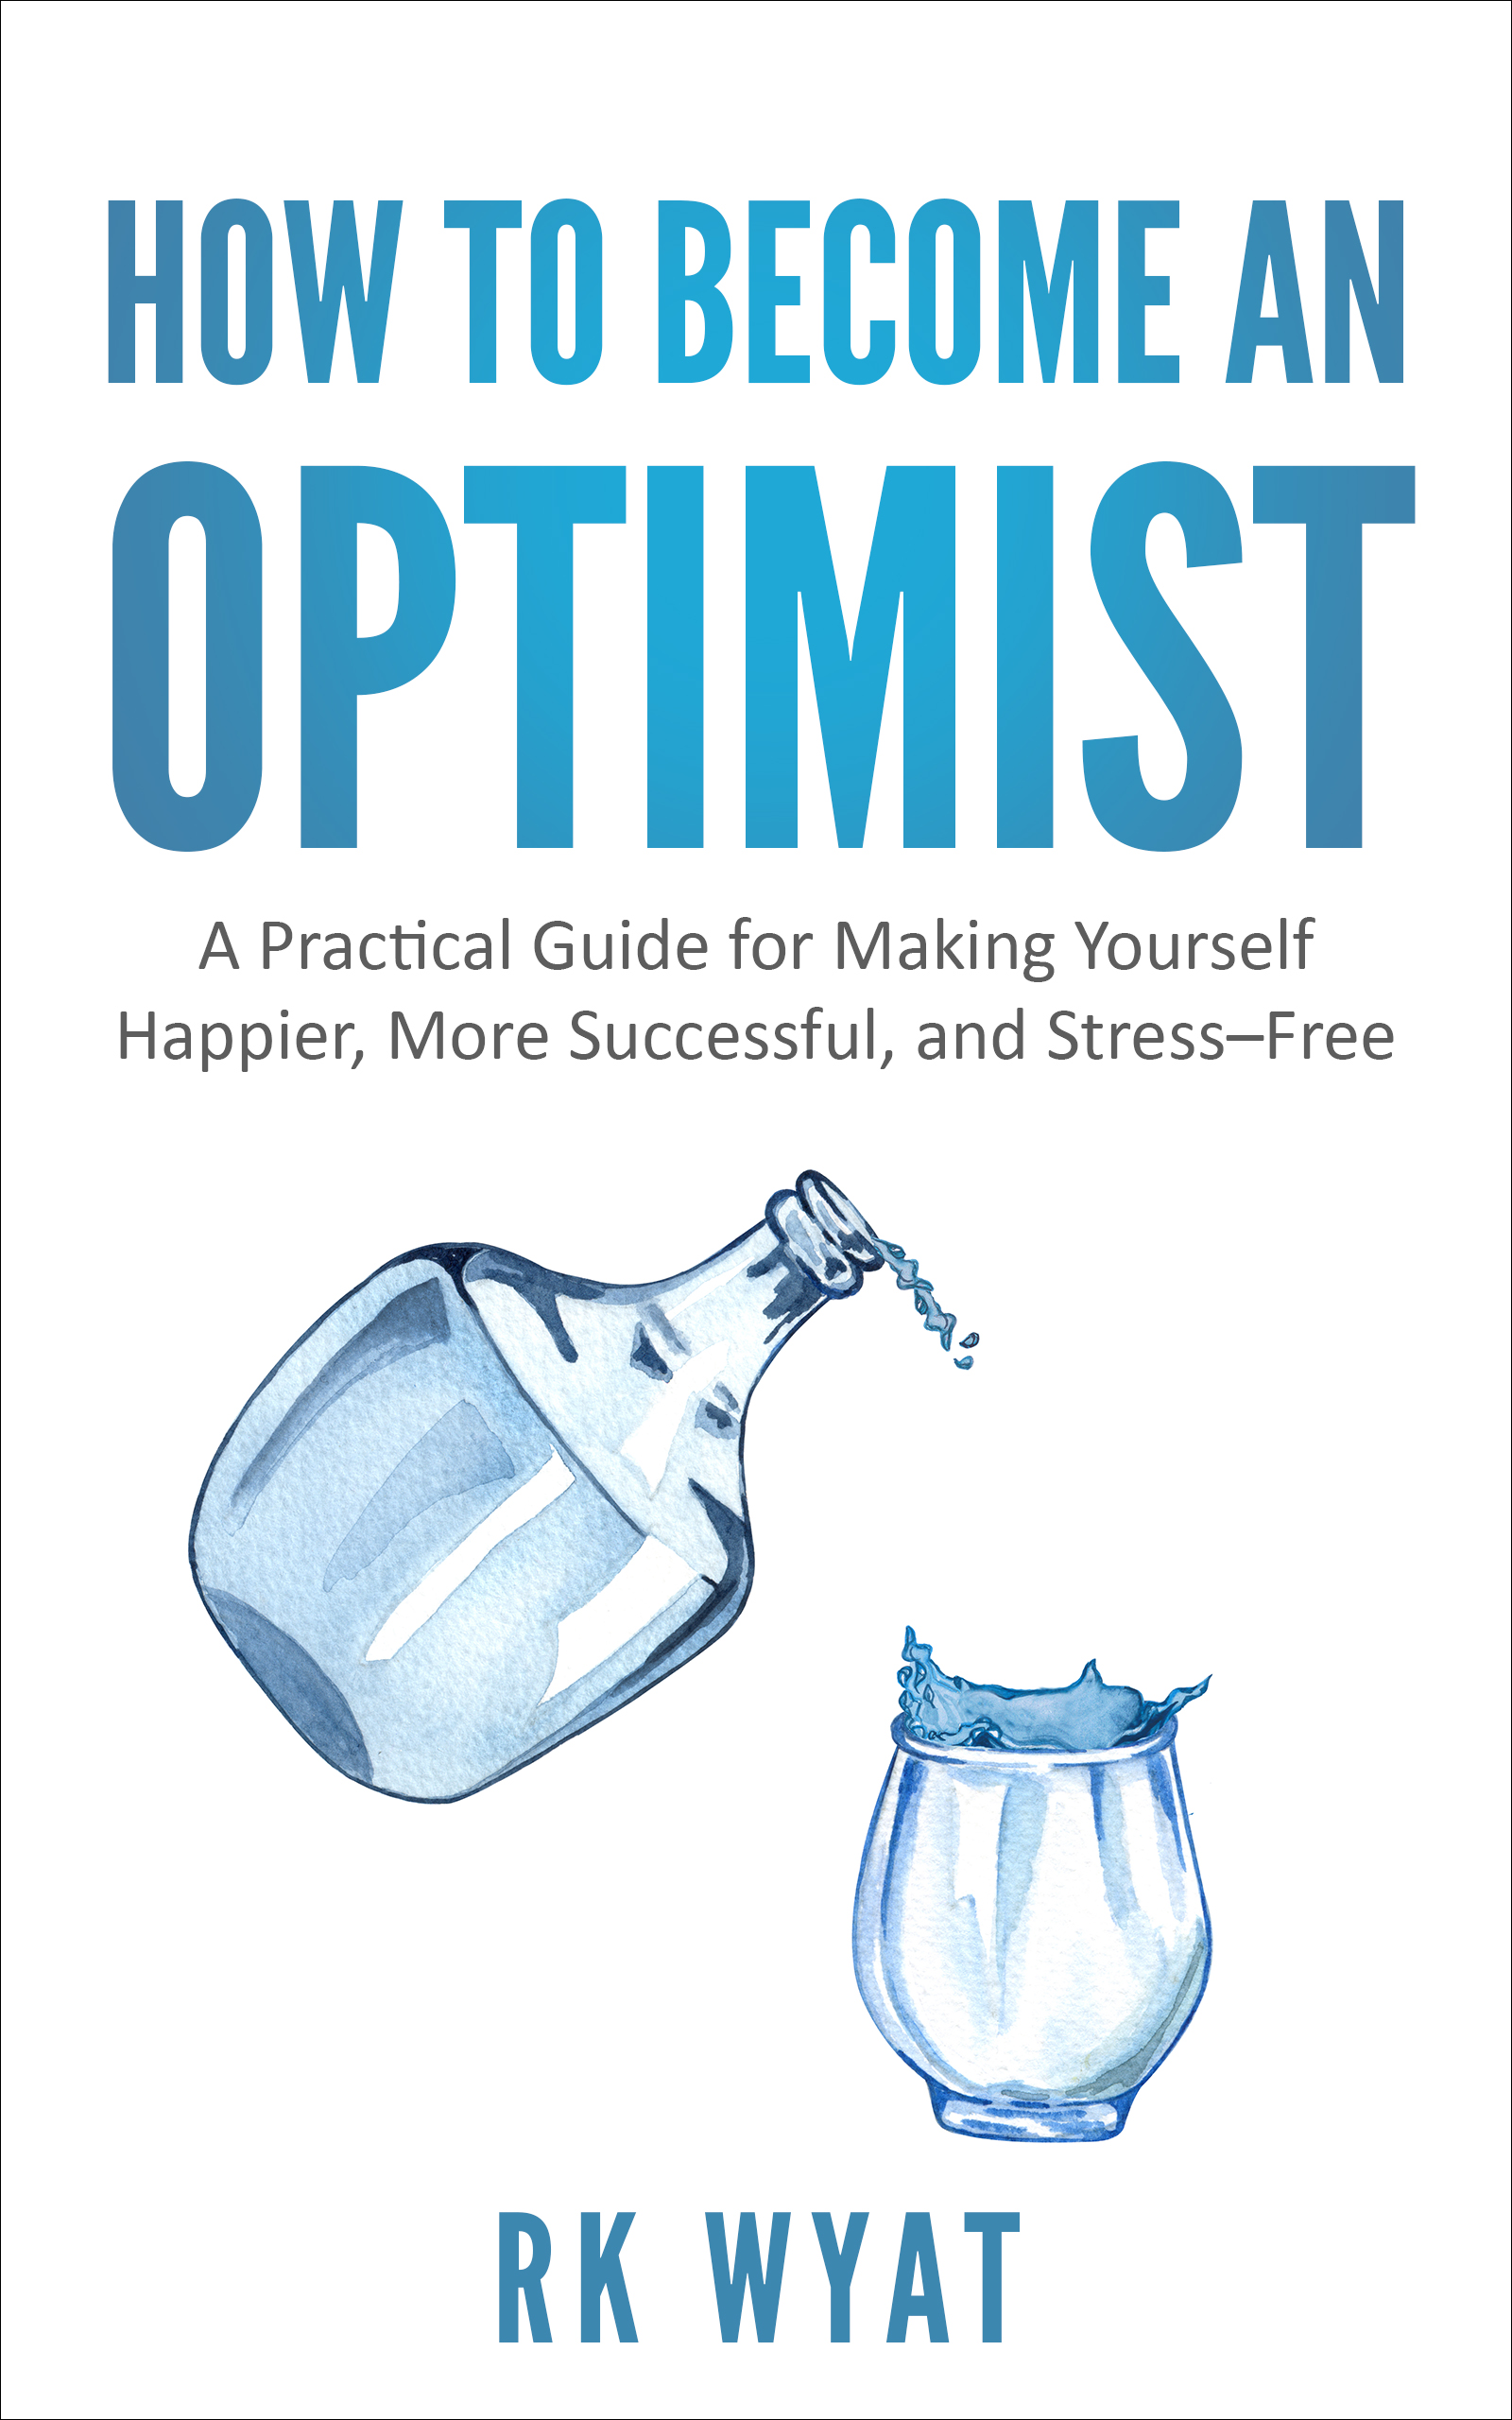 RK Wyat: How to Become an Optimist